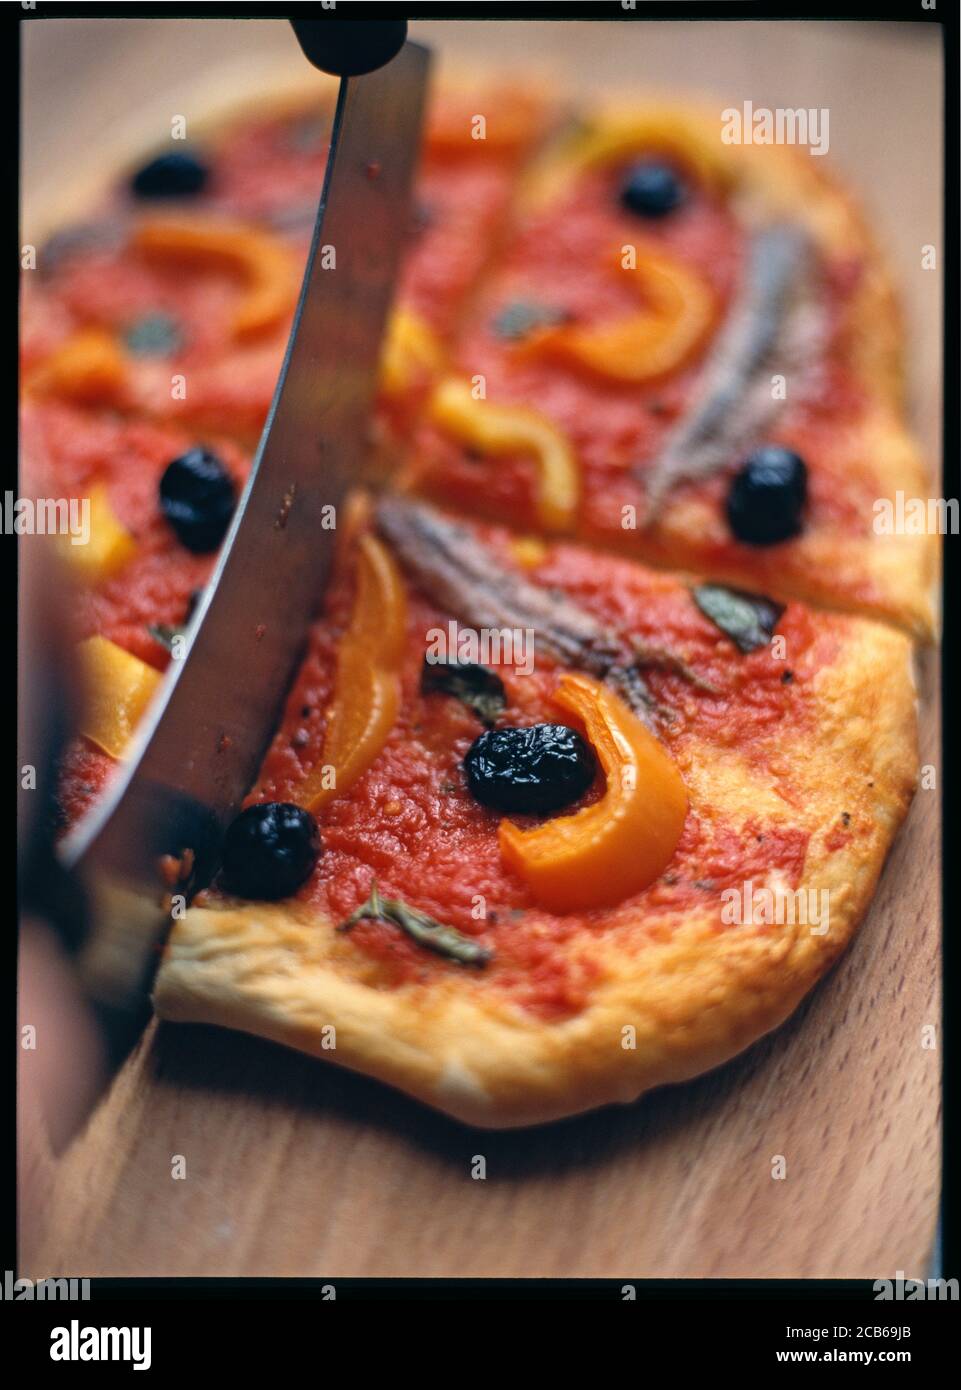 Cutting a homebaked tomato based pizza topped with olives, peppers,basil and anchovies topping Stock Photo